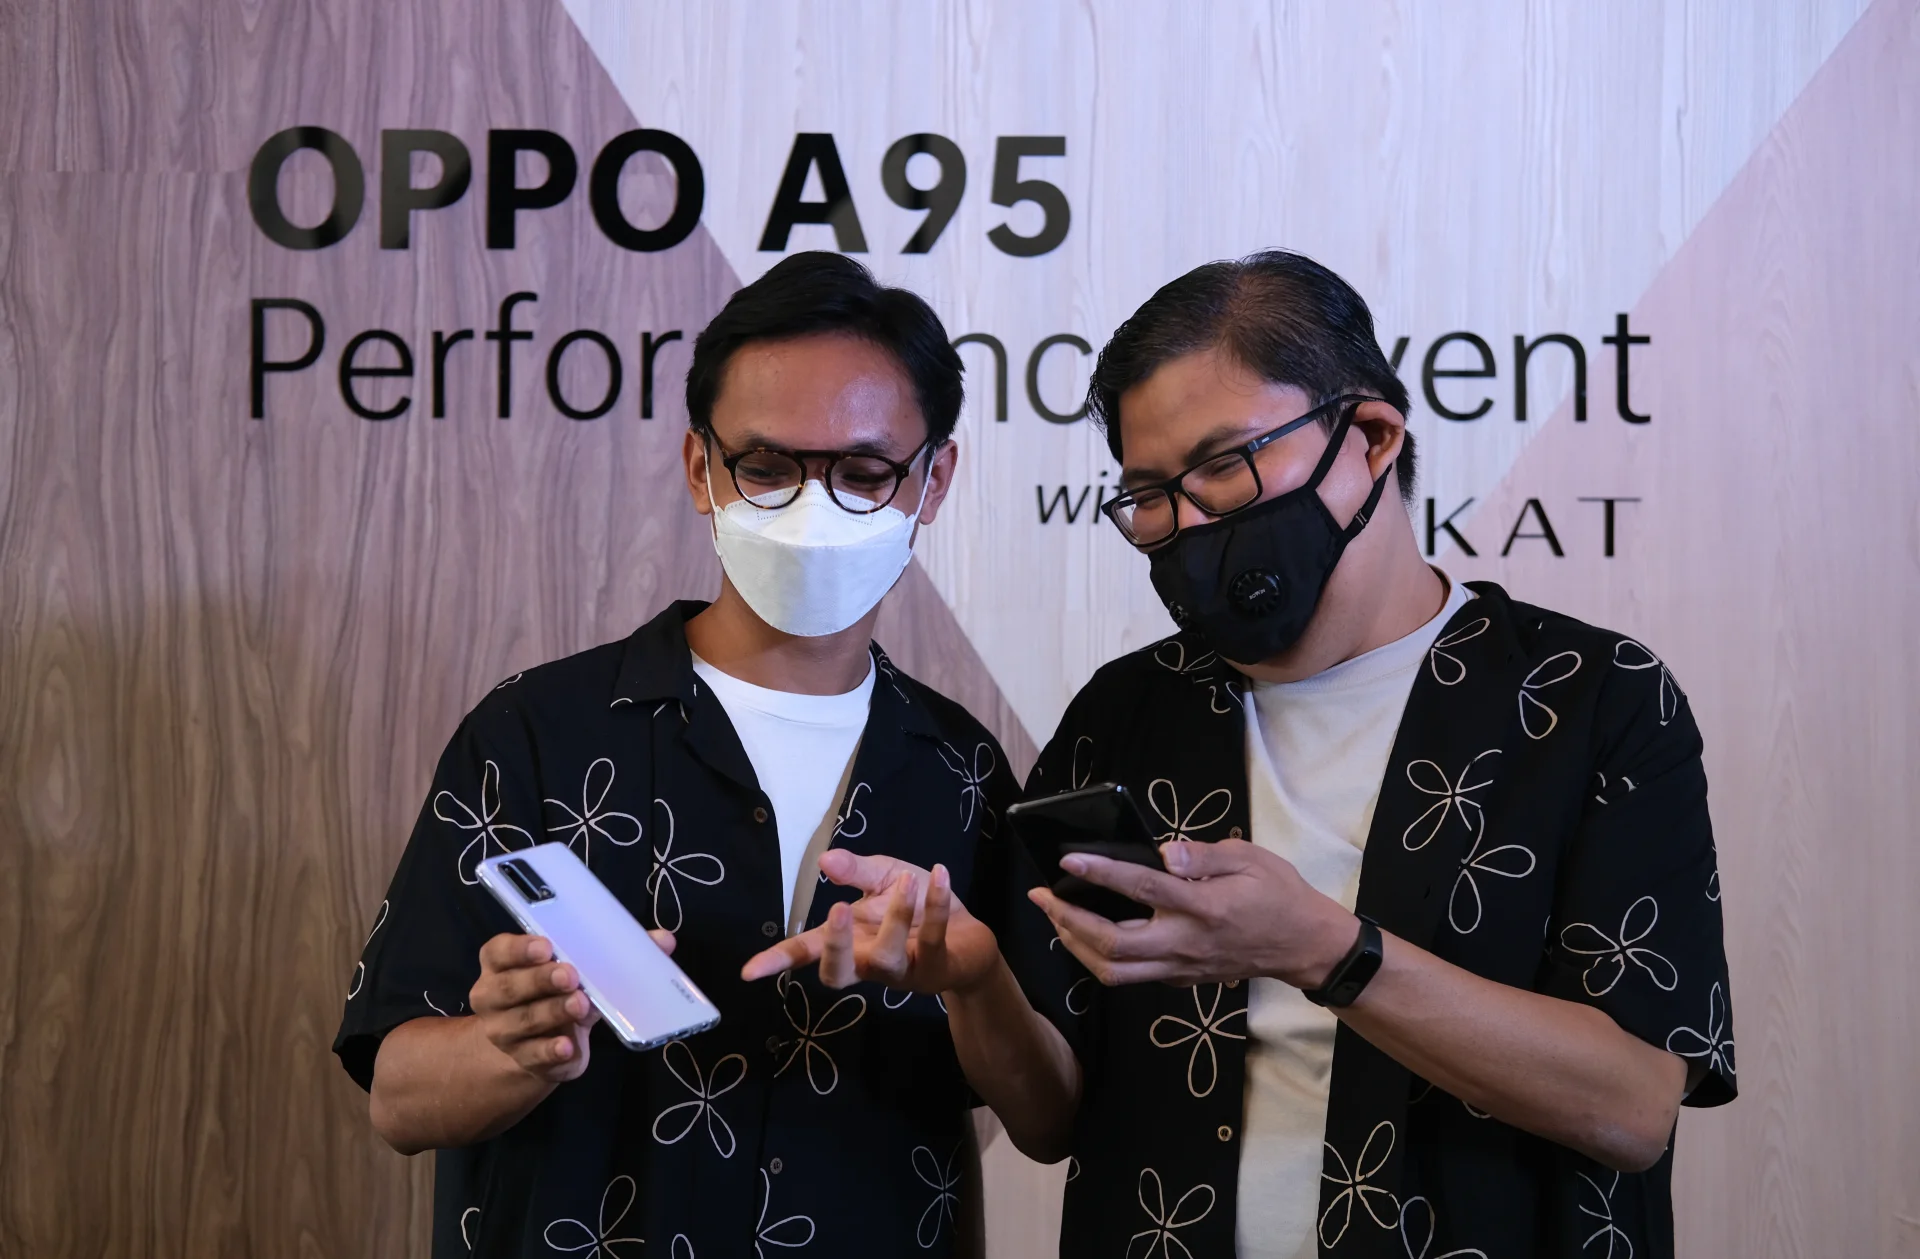 oppo a95 with sekat